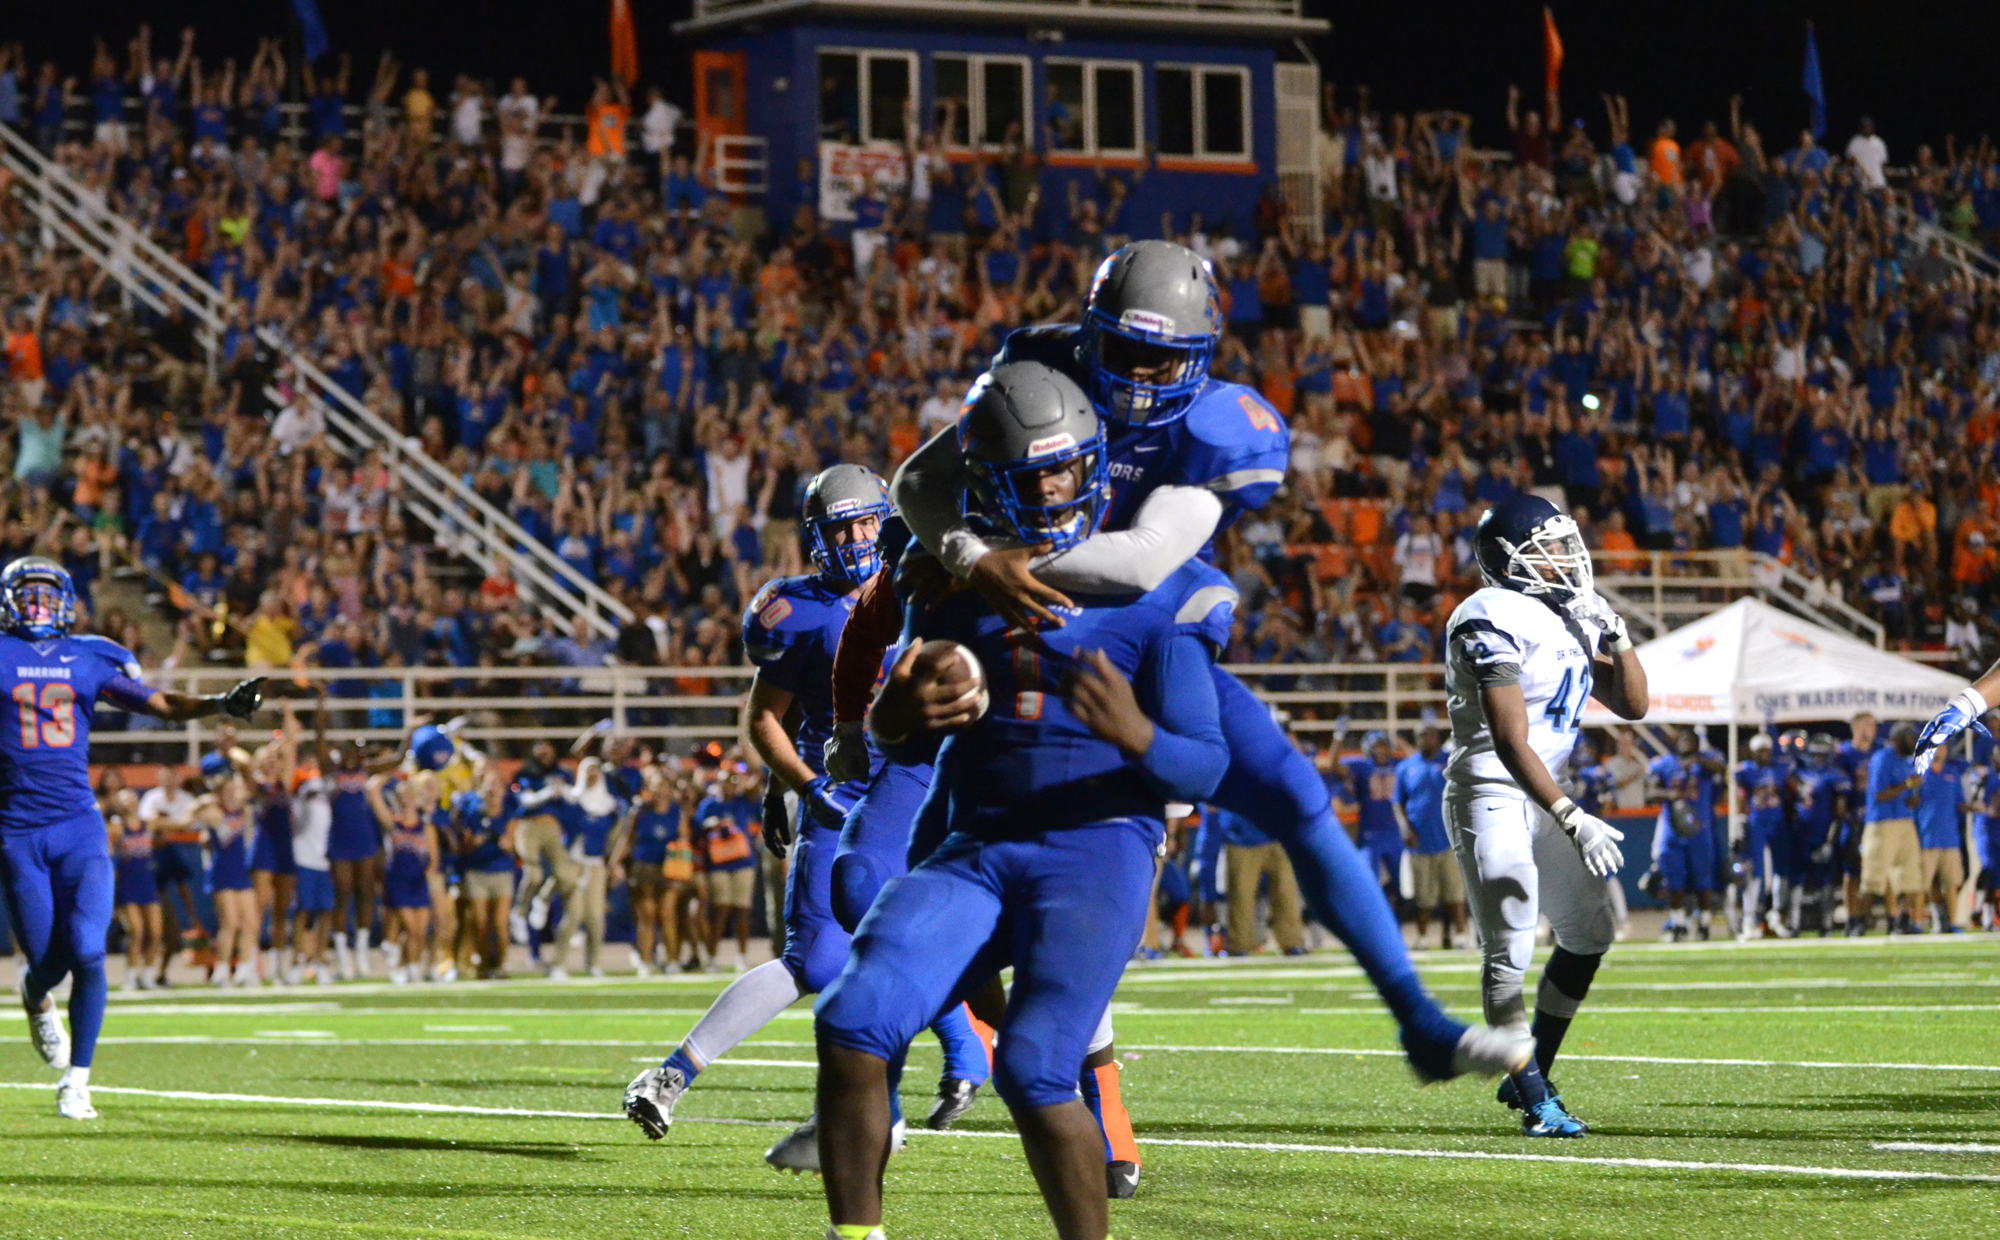 Woody Barrett scores the game winning touchdown for the Warriors Sept. 11 against Dr. Phillips.